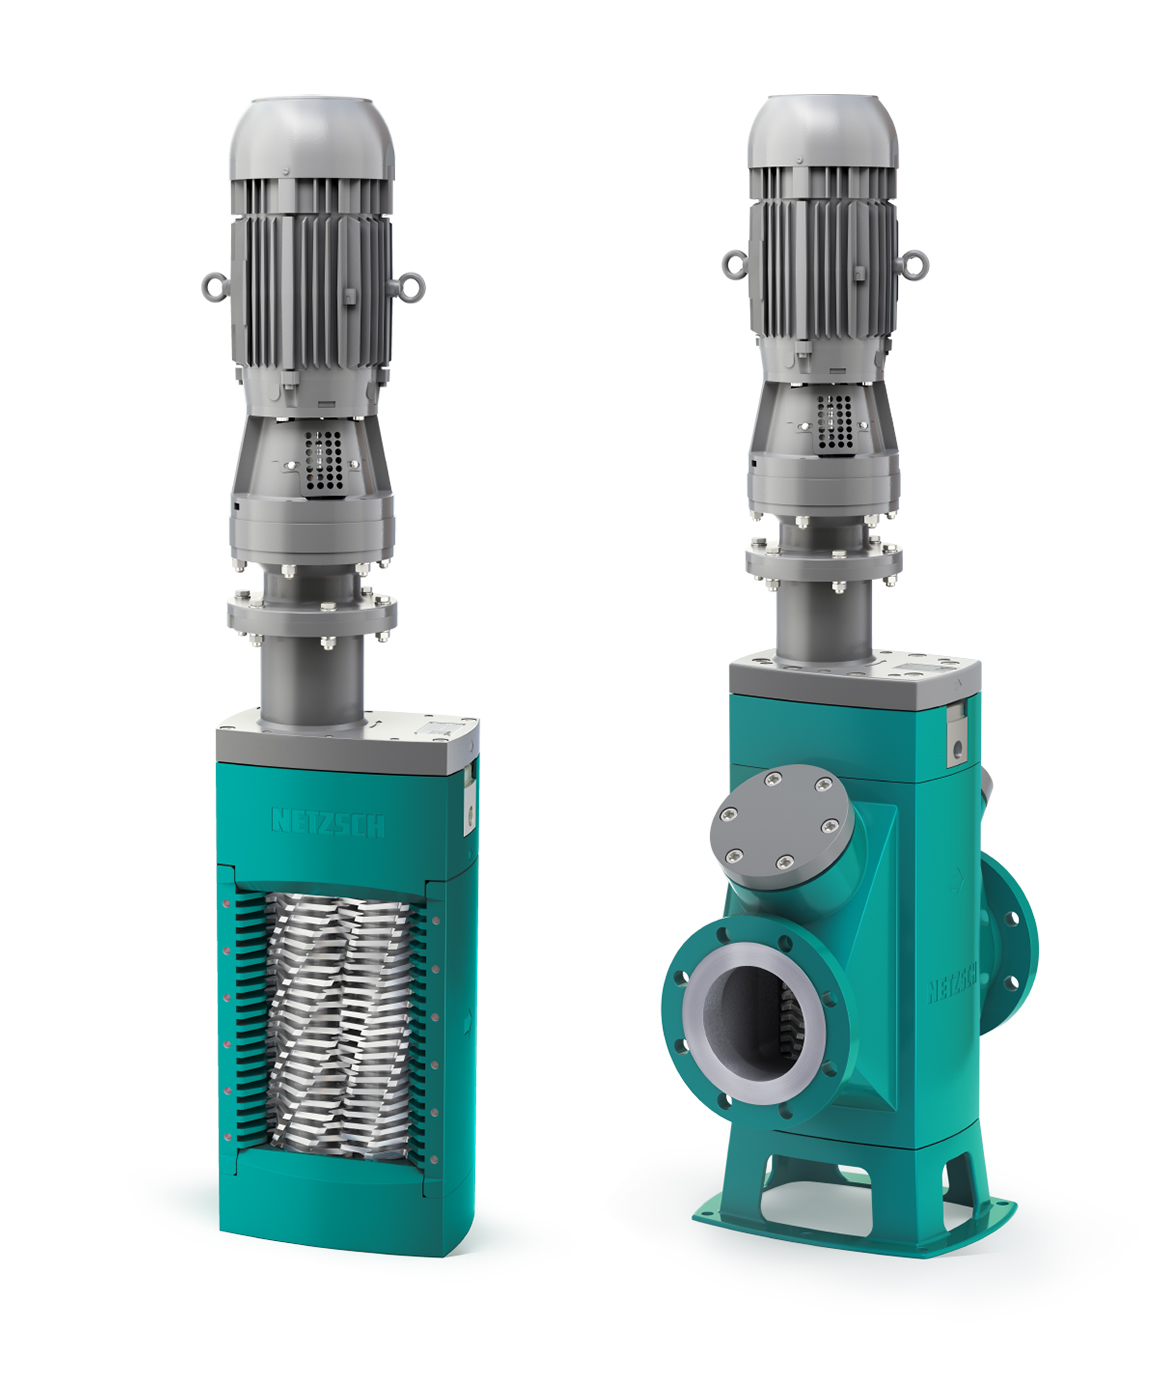 Netzch’s N.Mac Twin Shaft Grinder is designed to fragment materials in wastewater treatment, biogas and biomass plants, food and animal processing.